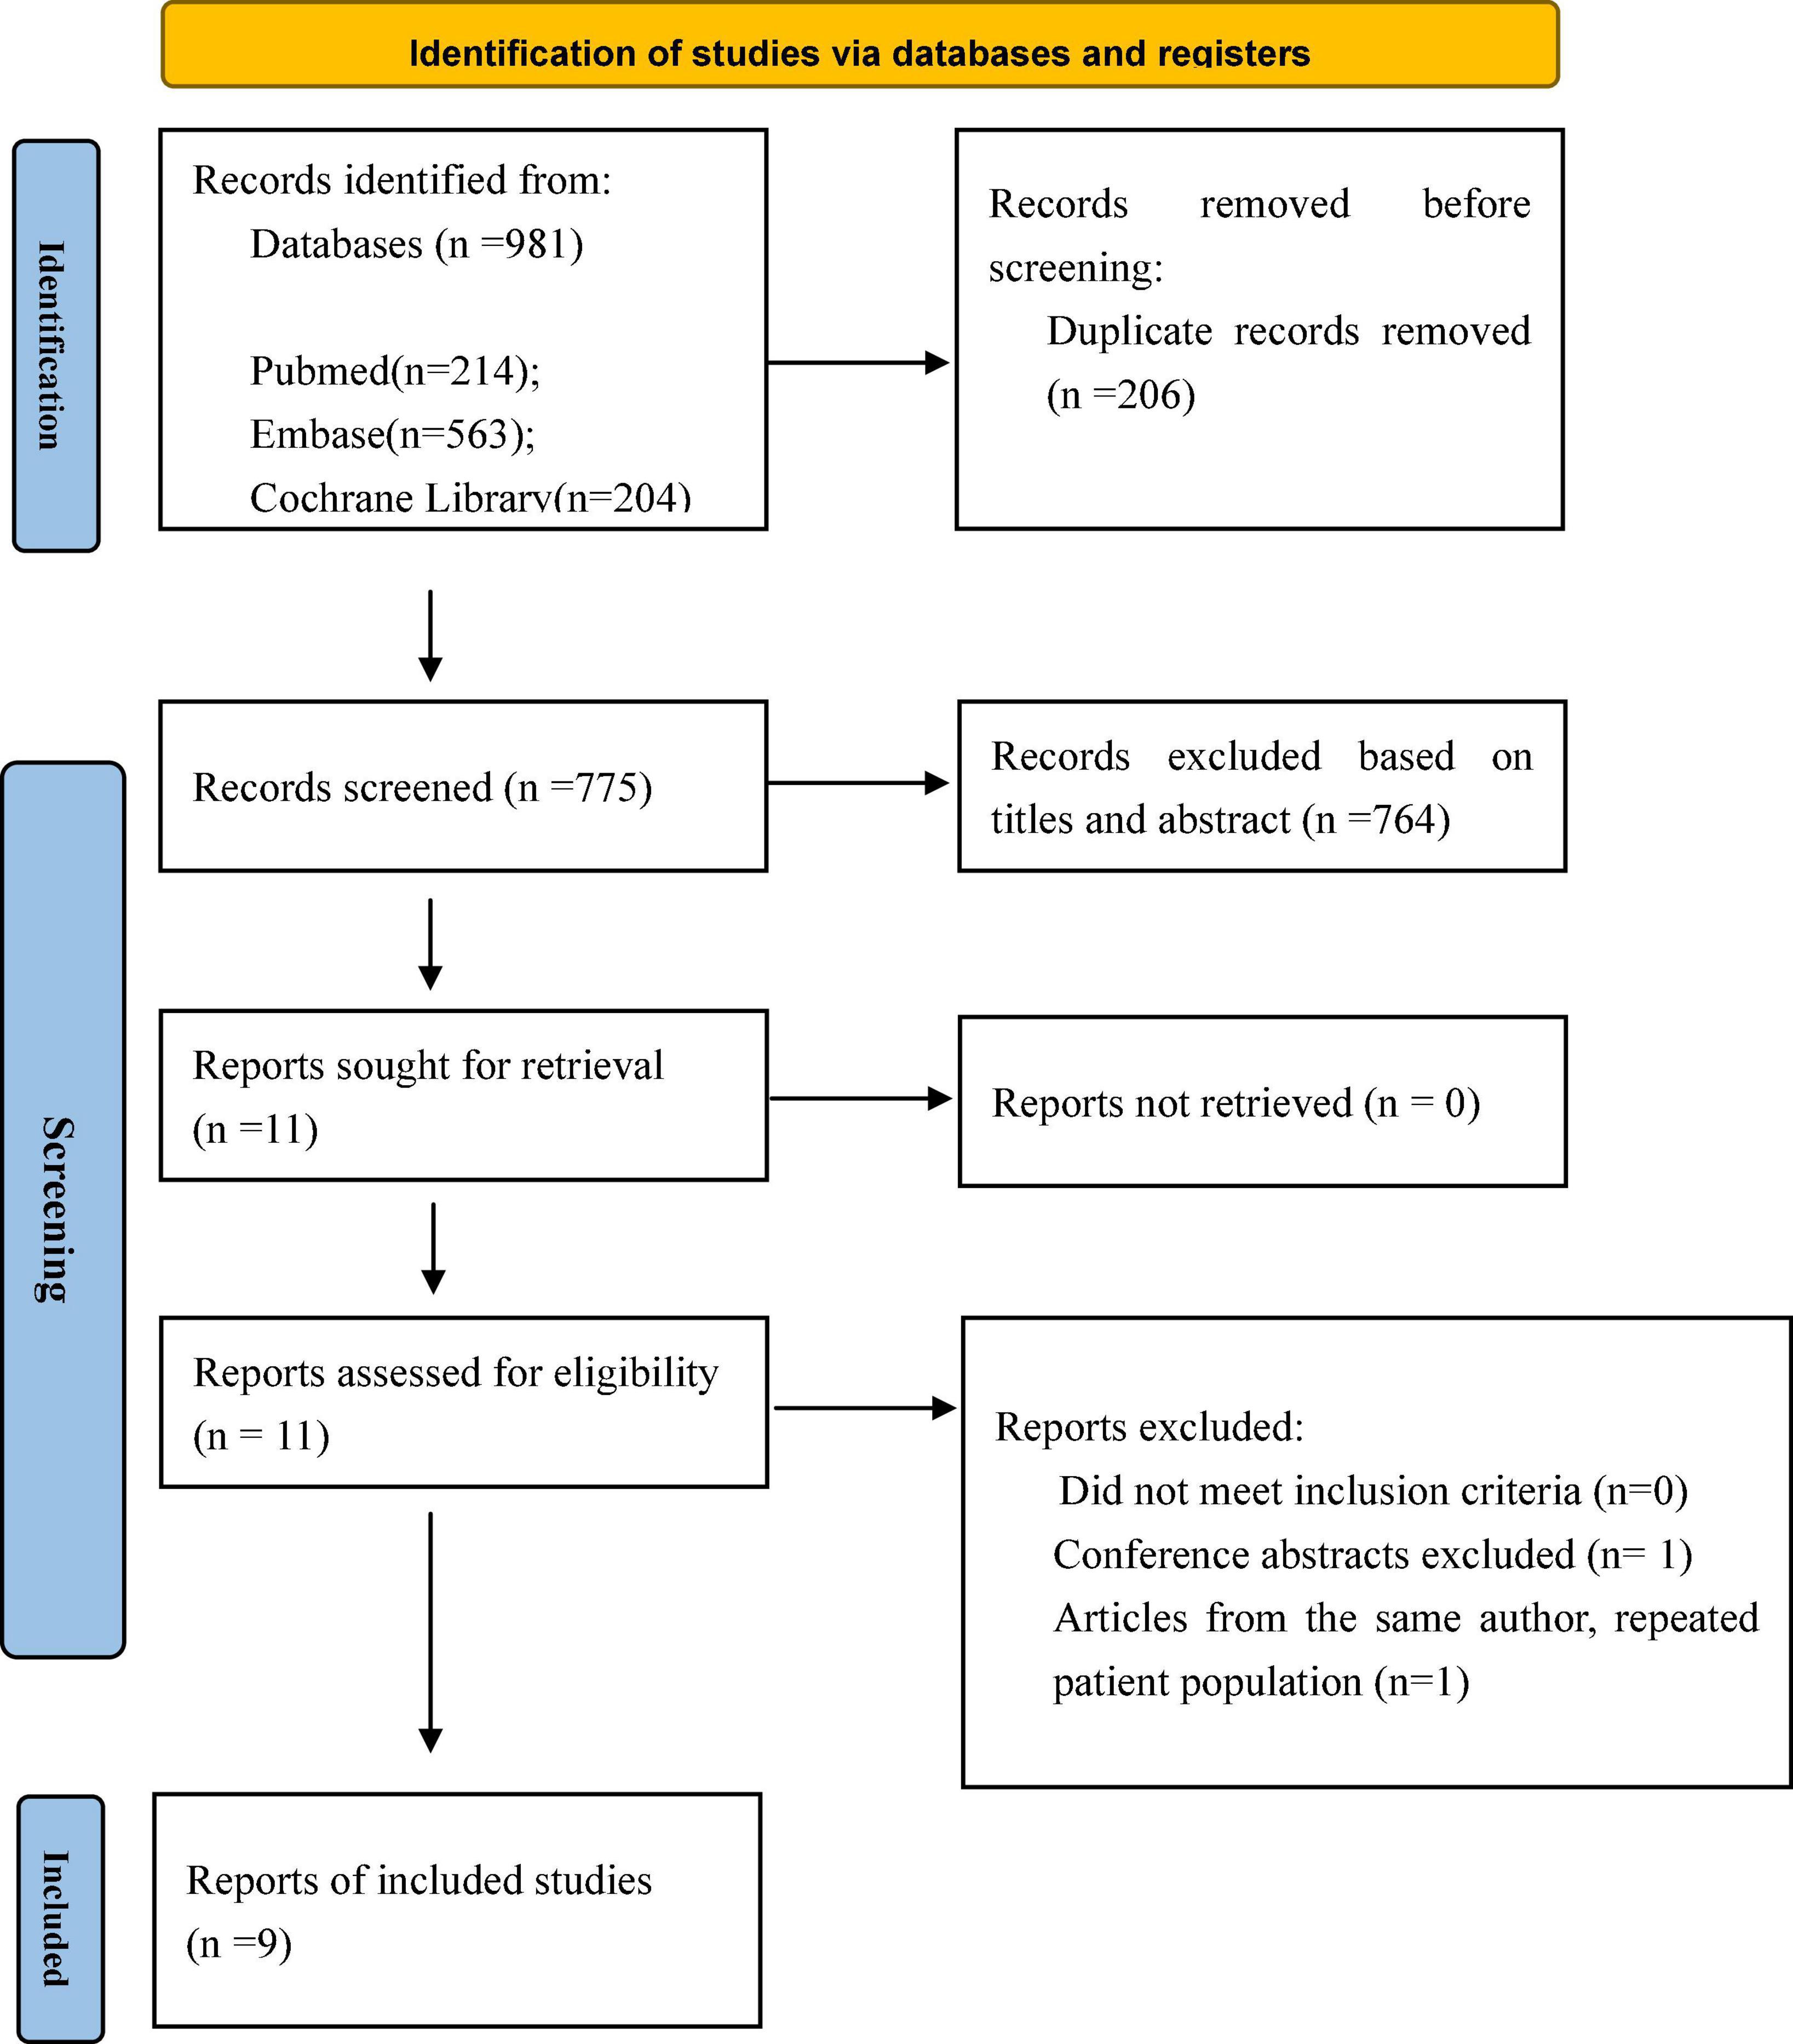 Transcatheter mitral valve replacement versus redo surgery for mitral prosthesis failure: A systematic review and meta-analysis